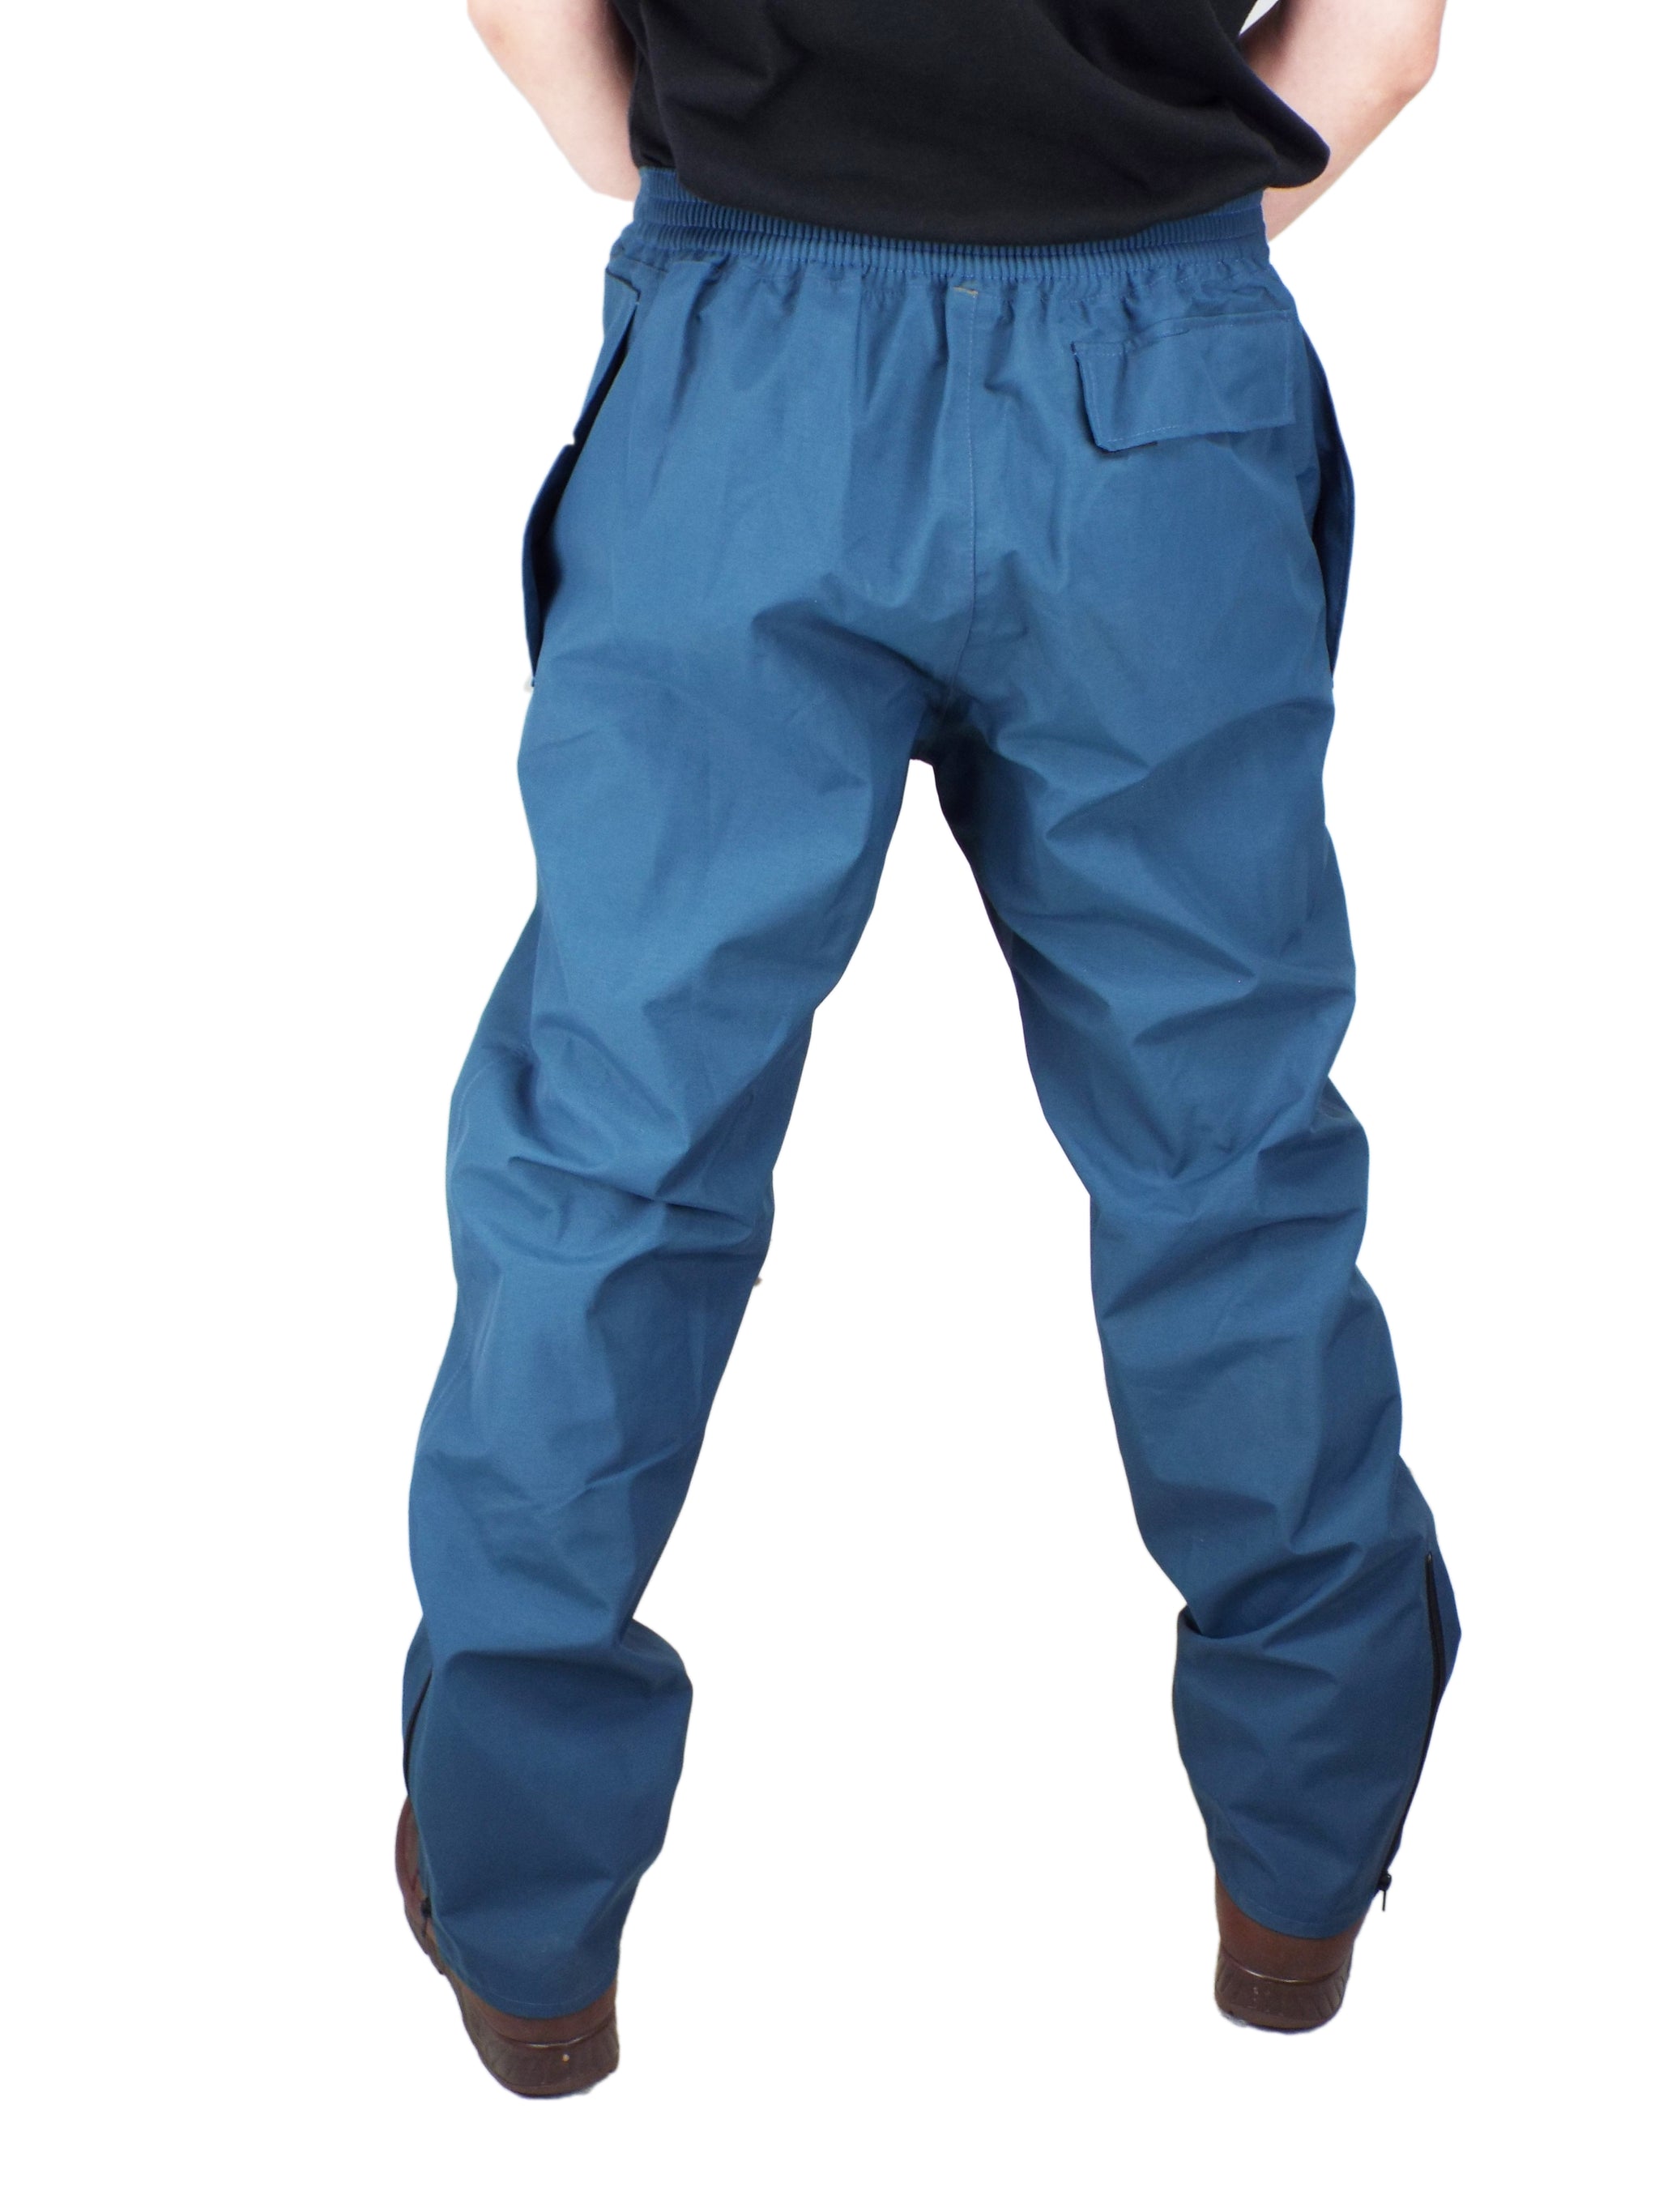 Best GoreTex waterproof trousers  Lifestyle  Whats The Best